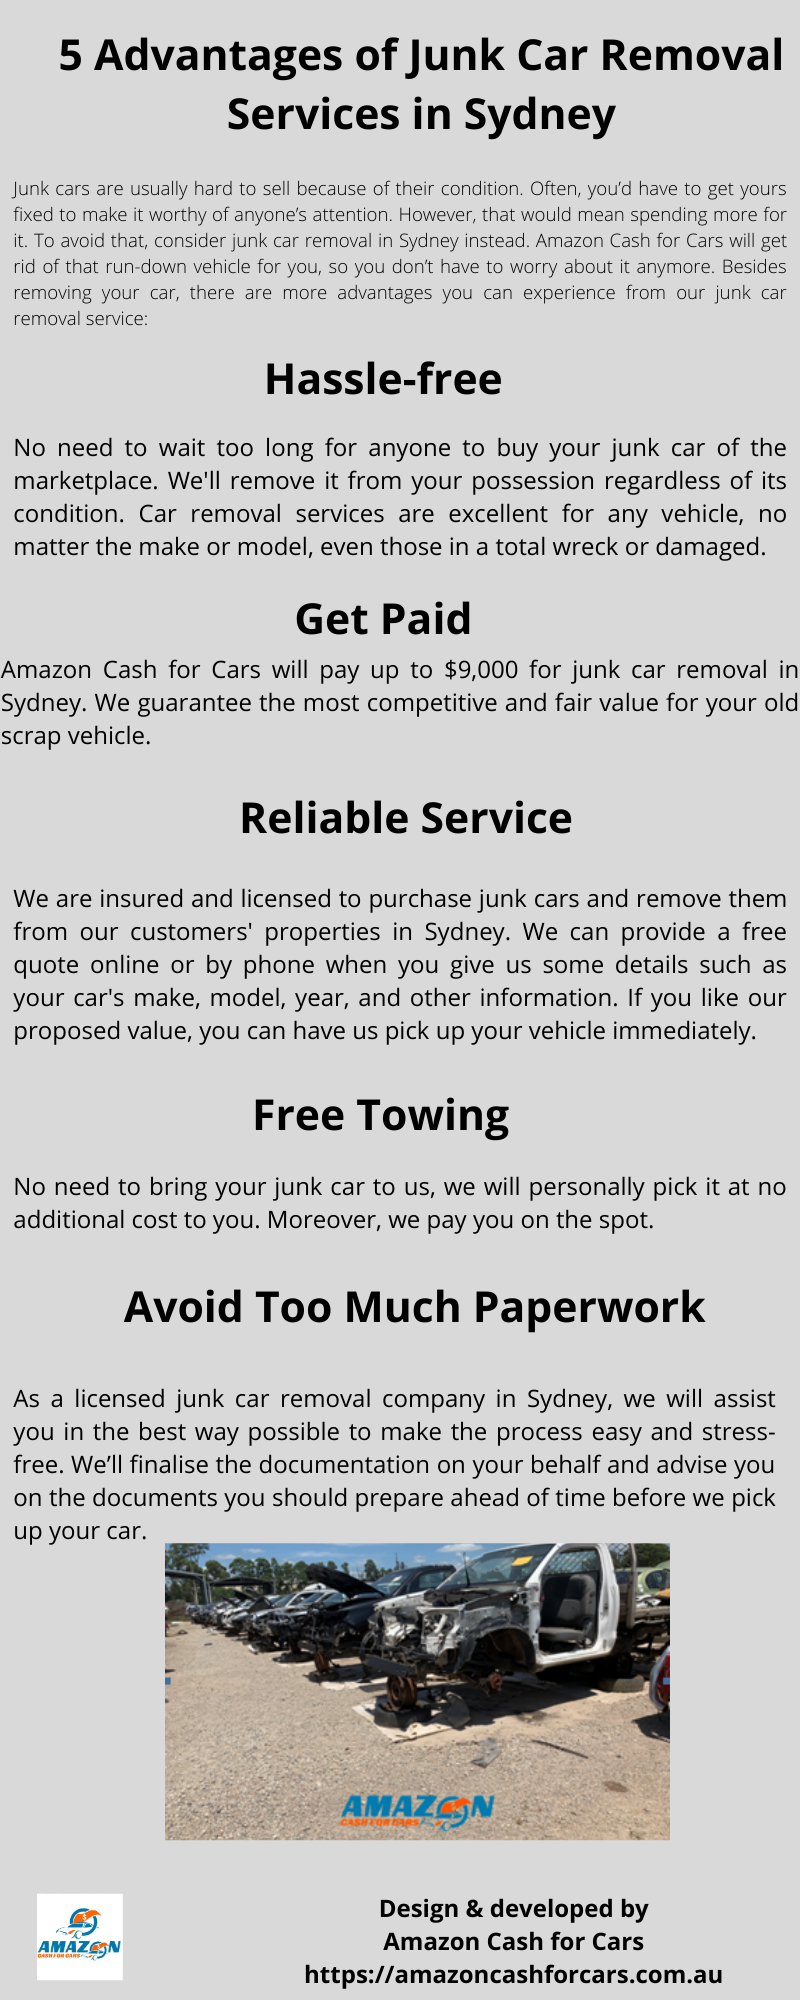 5 Advantages of Junk Car Removal Services in Sydney.png  by Amazoncashforcars